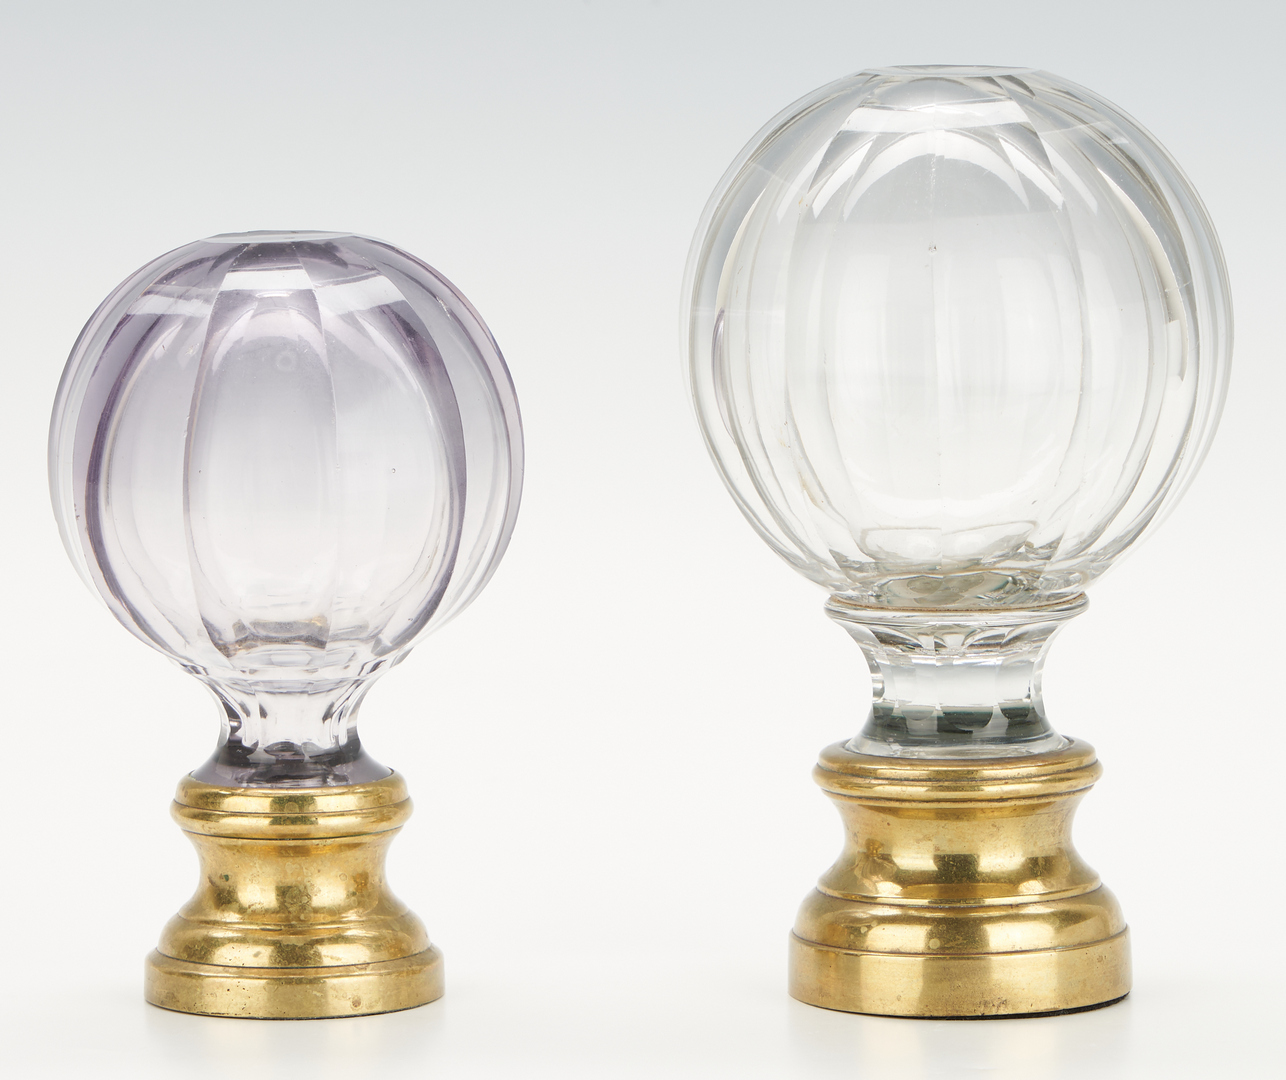 Lot 246: 4 French Spherical Glass Newel Finials